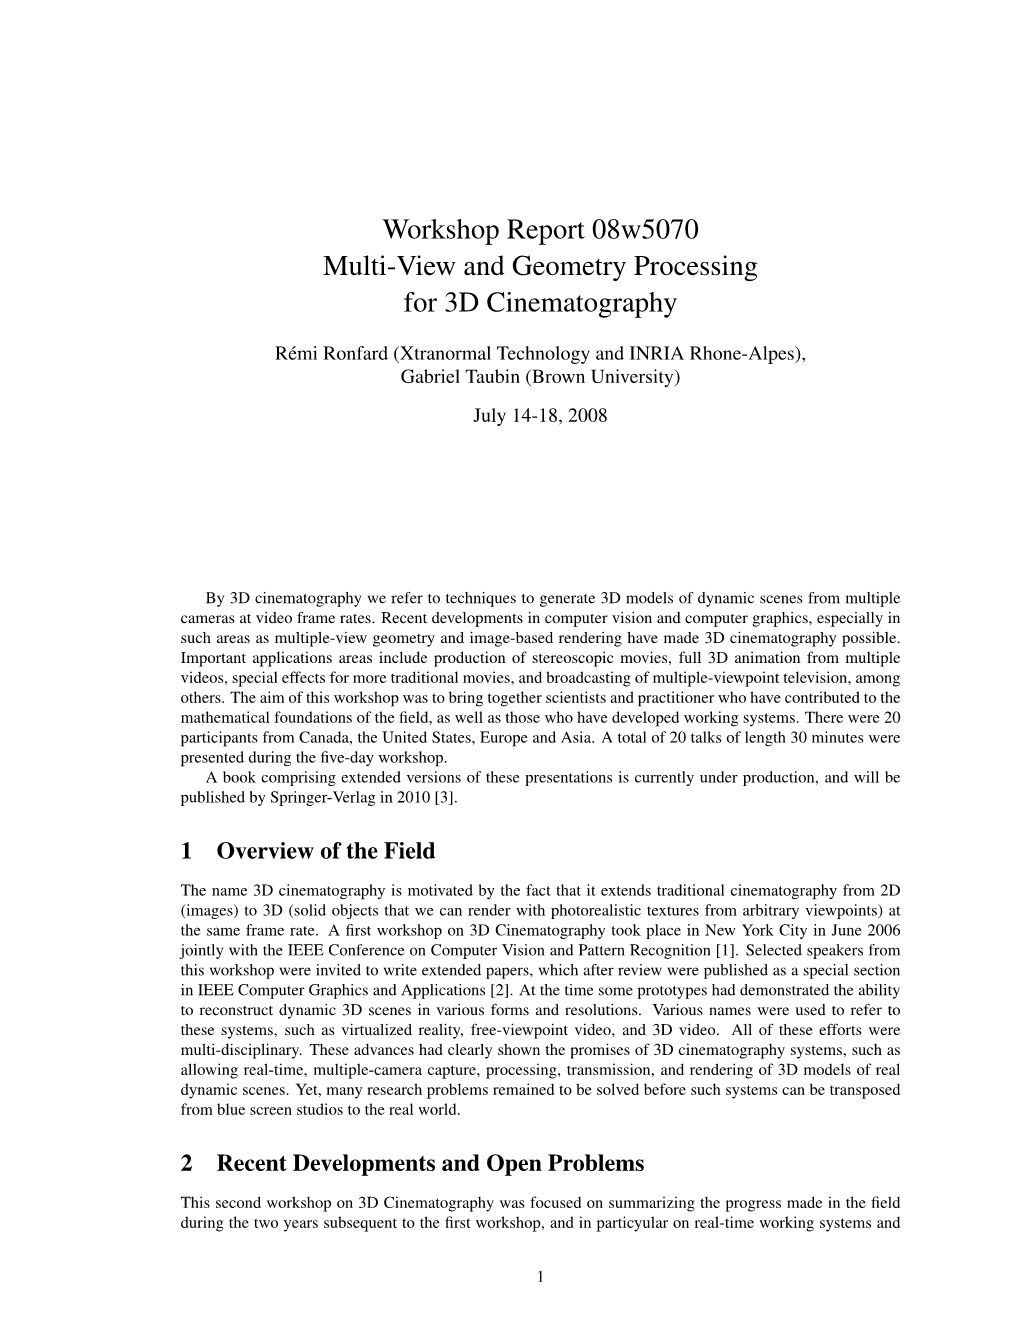 Workshop Report 08W5070 Multi-View and Geometry Processing for 3D Cinematography